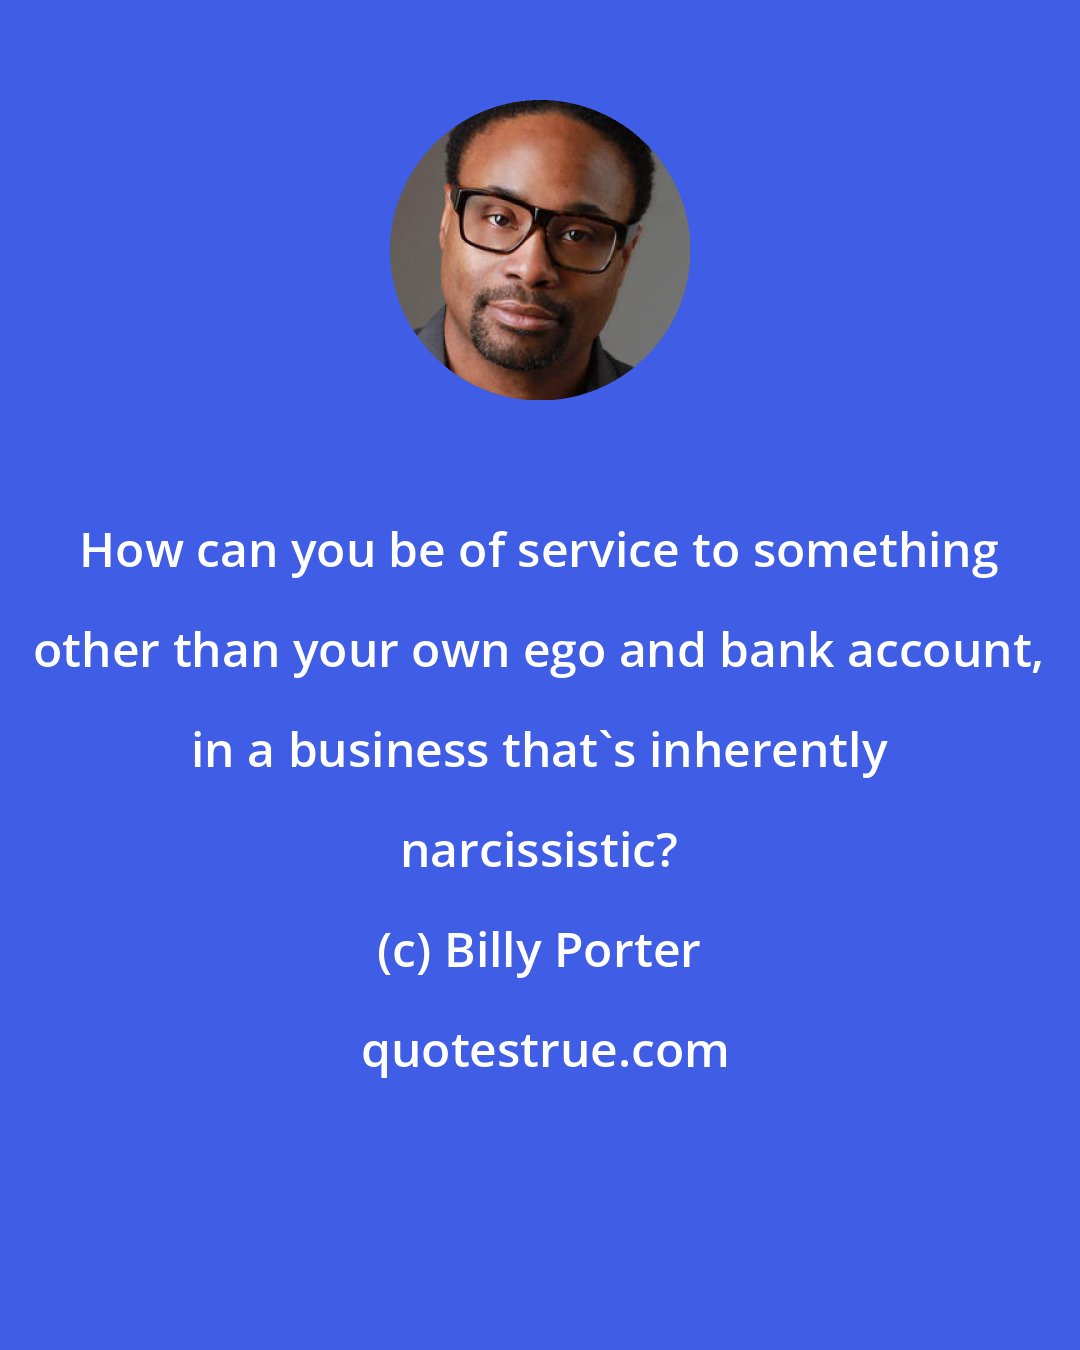 Billy Porter: How can you be of service to something other than your own ego and bank account, in a business that's inherently narcissistic?